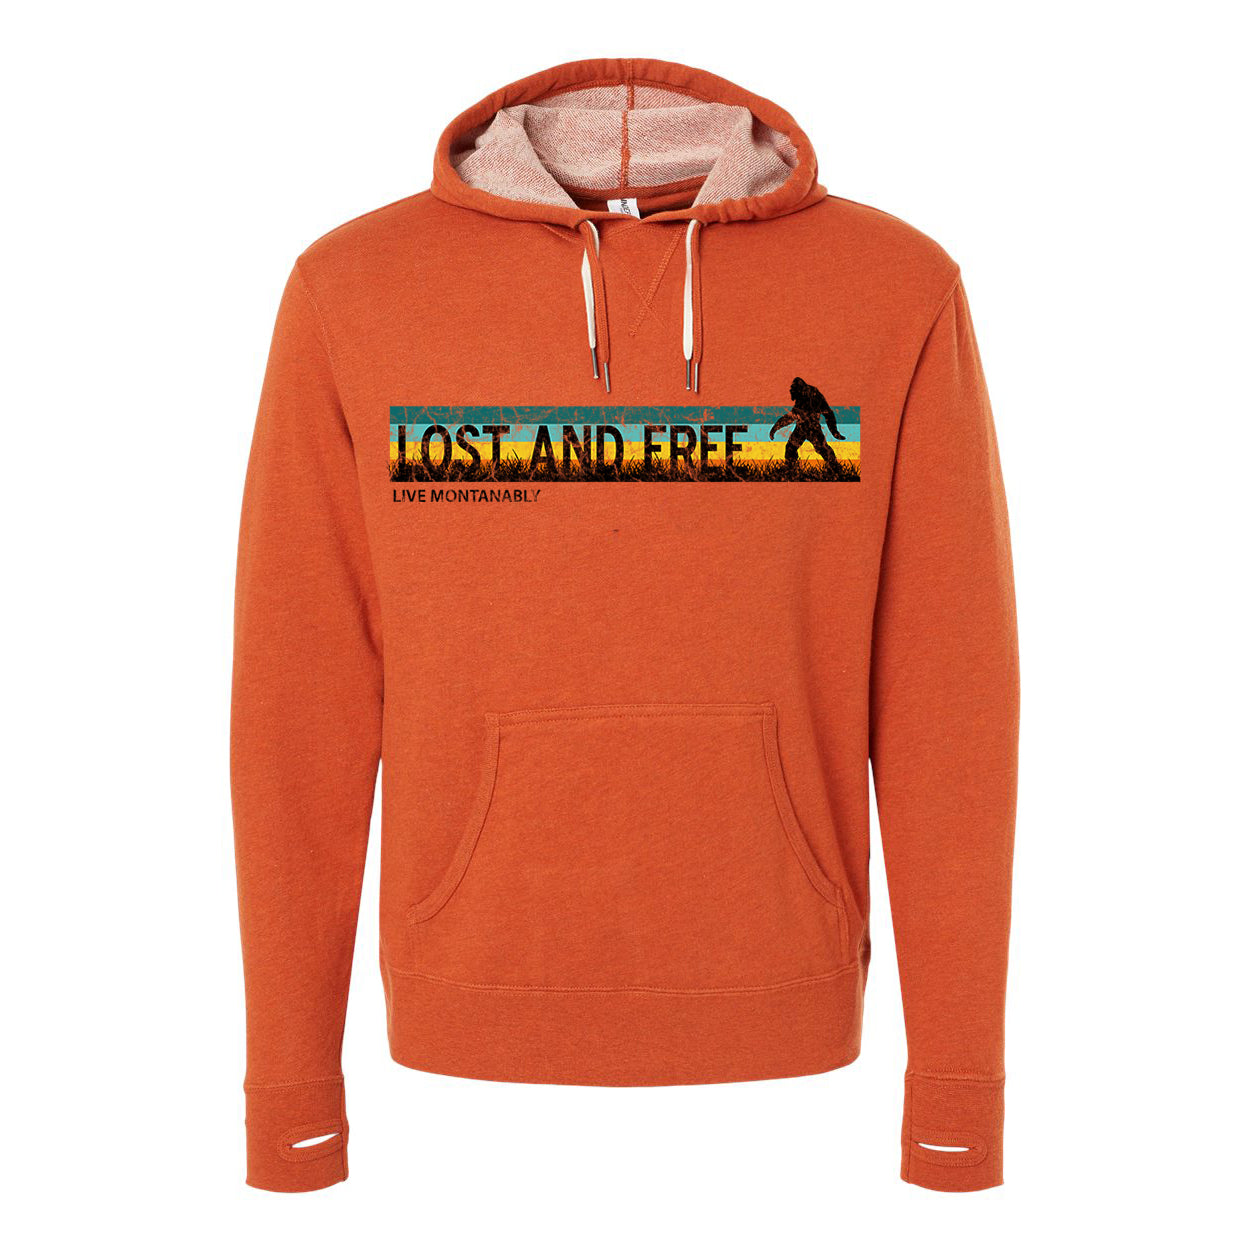 LOST AND FREE HOODIE